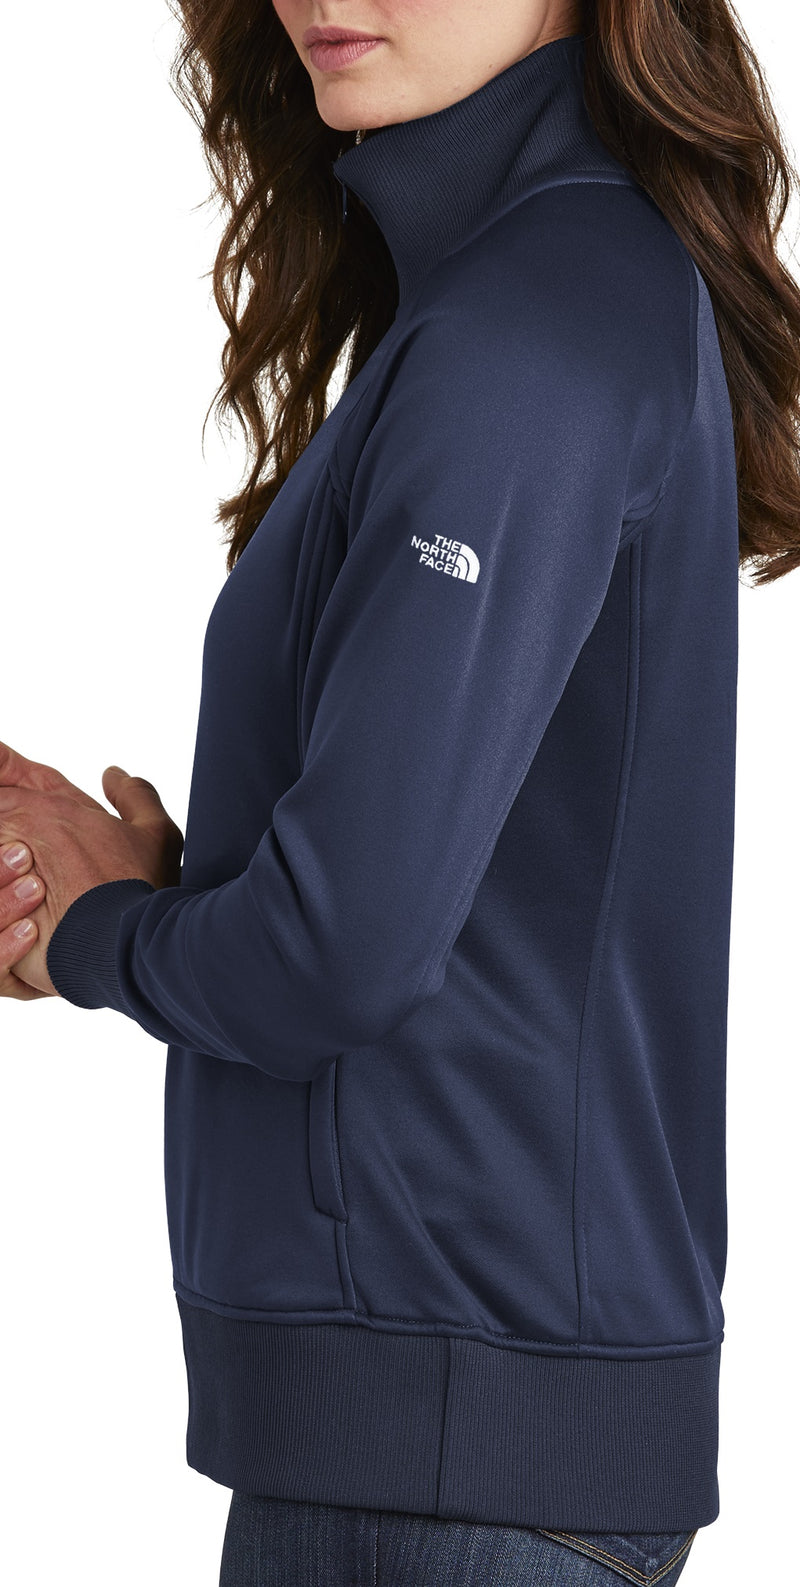 The North Face [NF0A3SEV] Tech Full-Zip Fleece Jacket. Live Chat For Bulk Discounts.